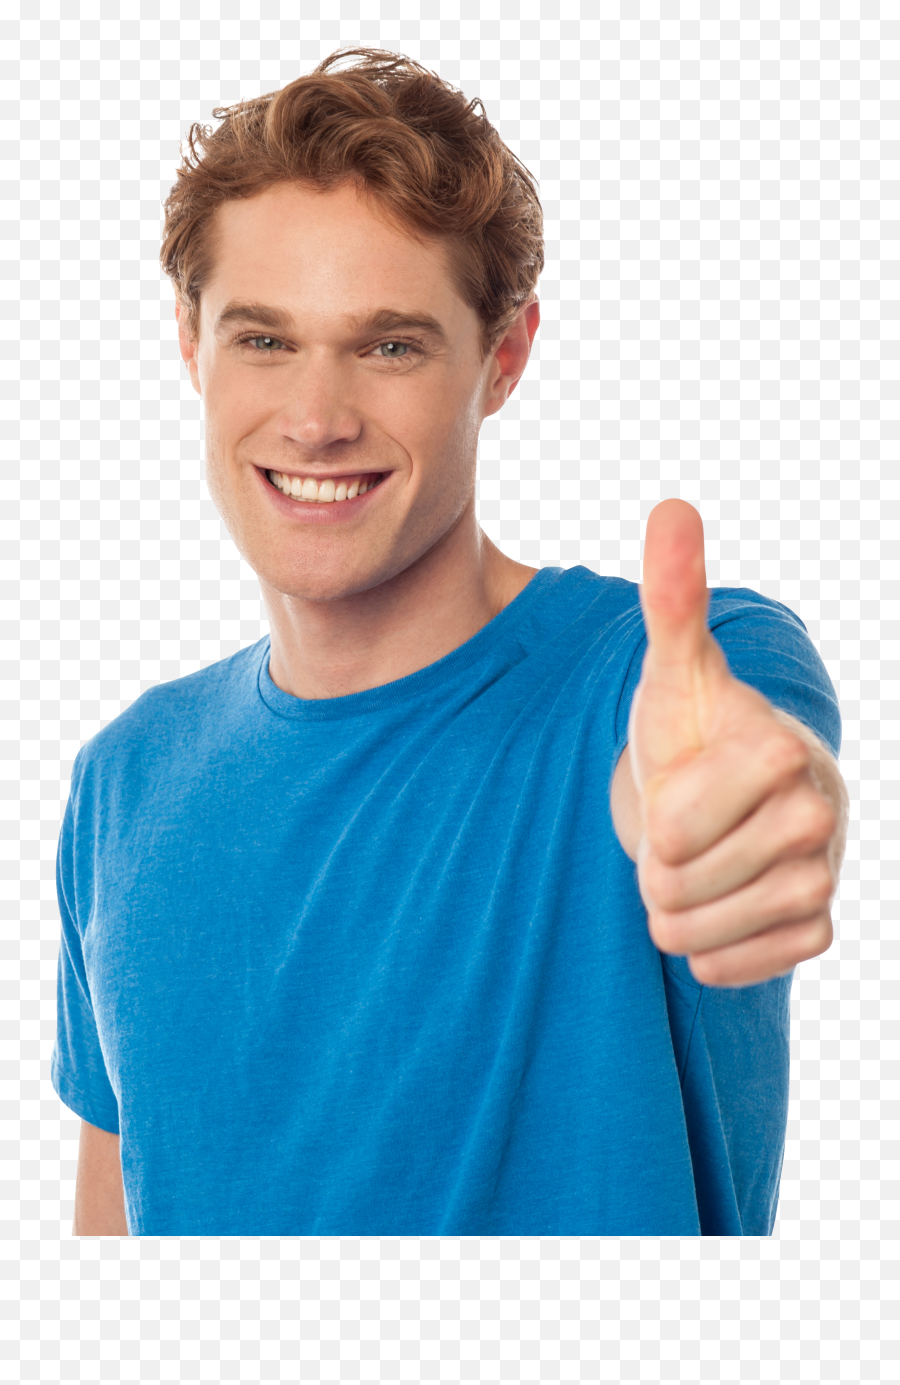 Men Pointing Thumbs Up Png Image - Thumbs Up Person Png Man Thumbs Up Png Emoji,Thumbs Up Emoji No Background